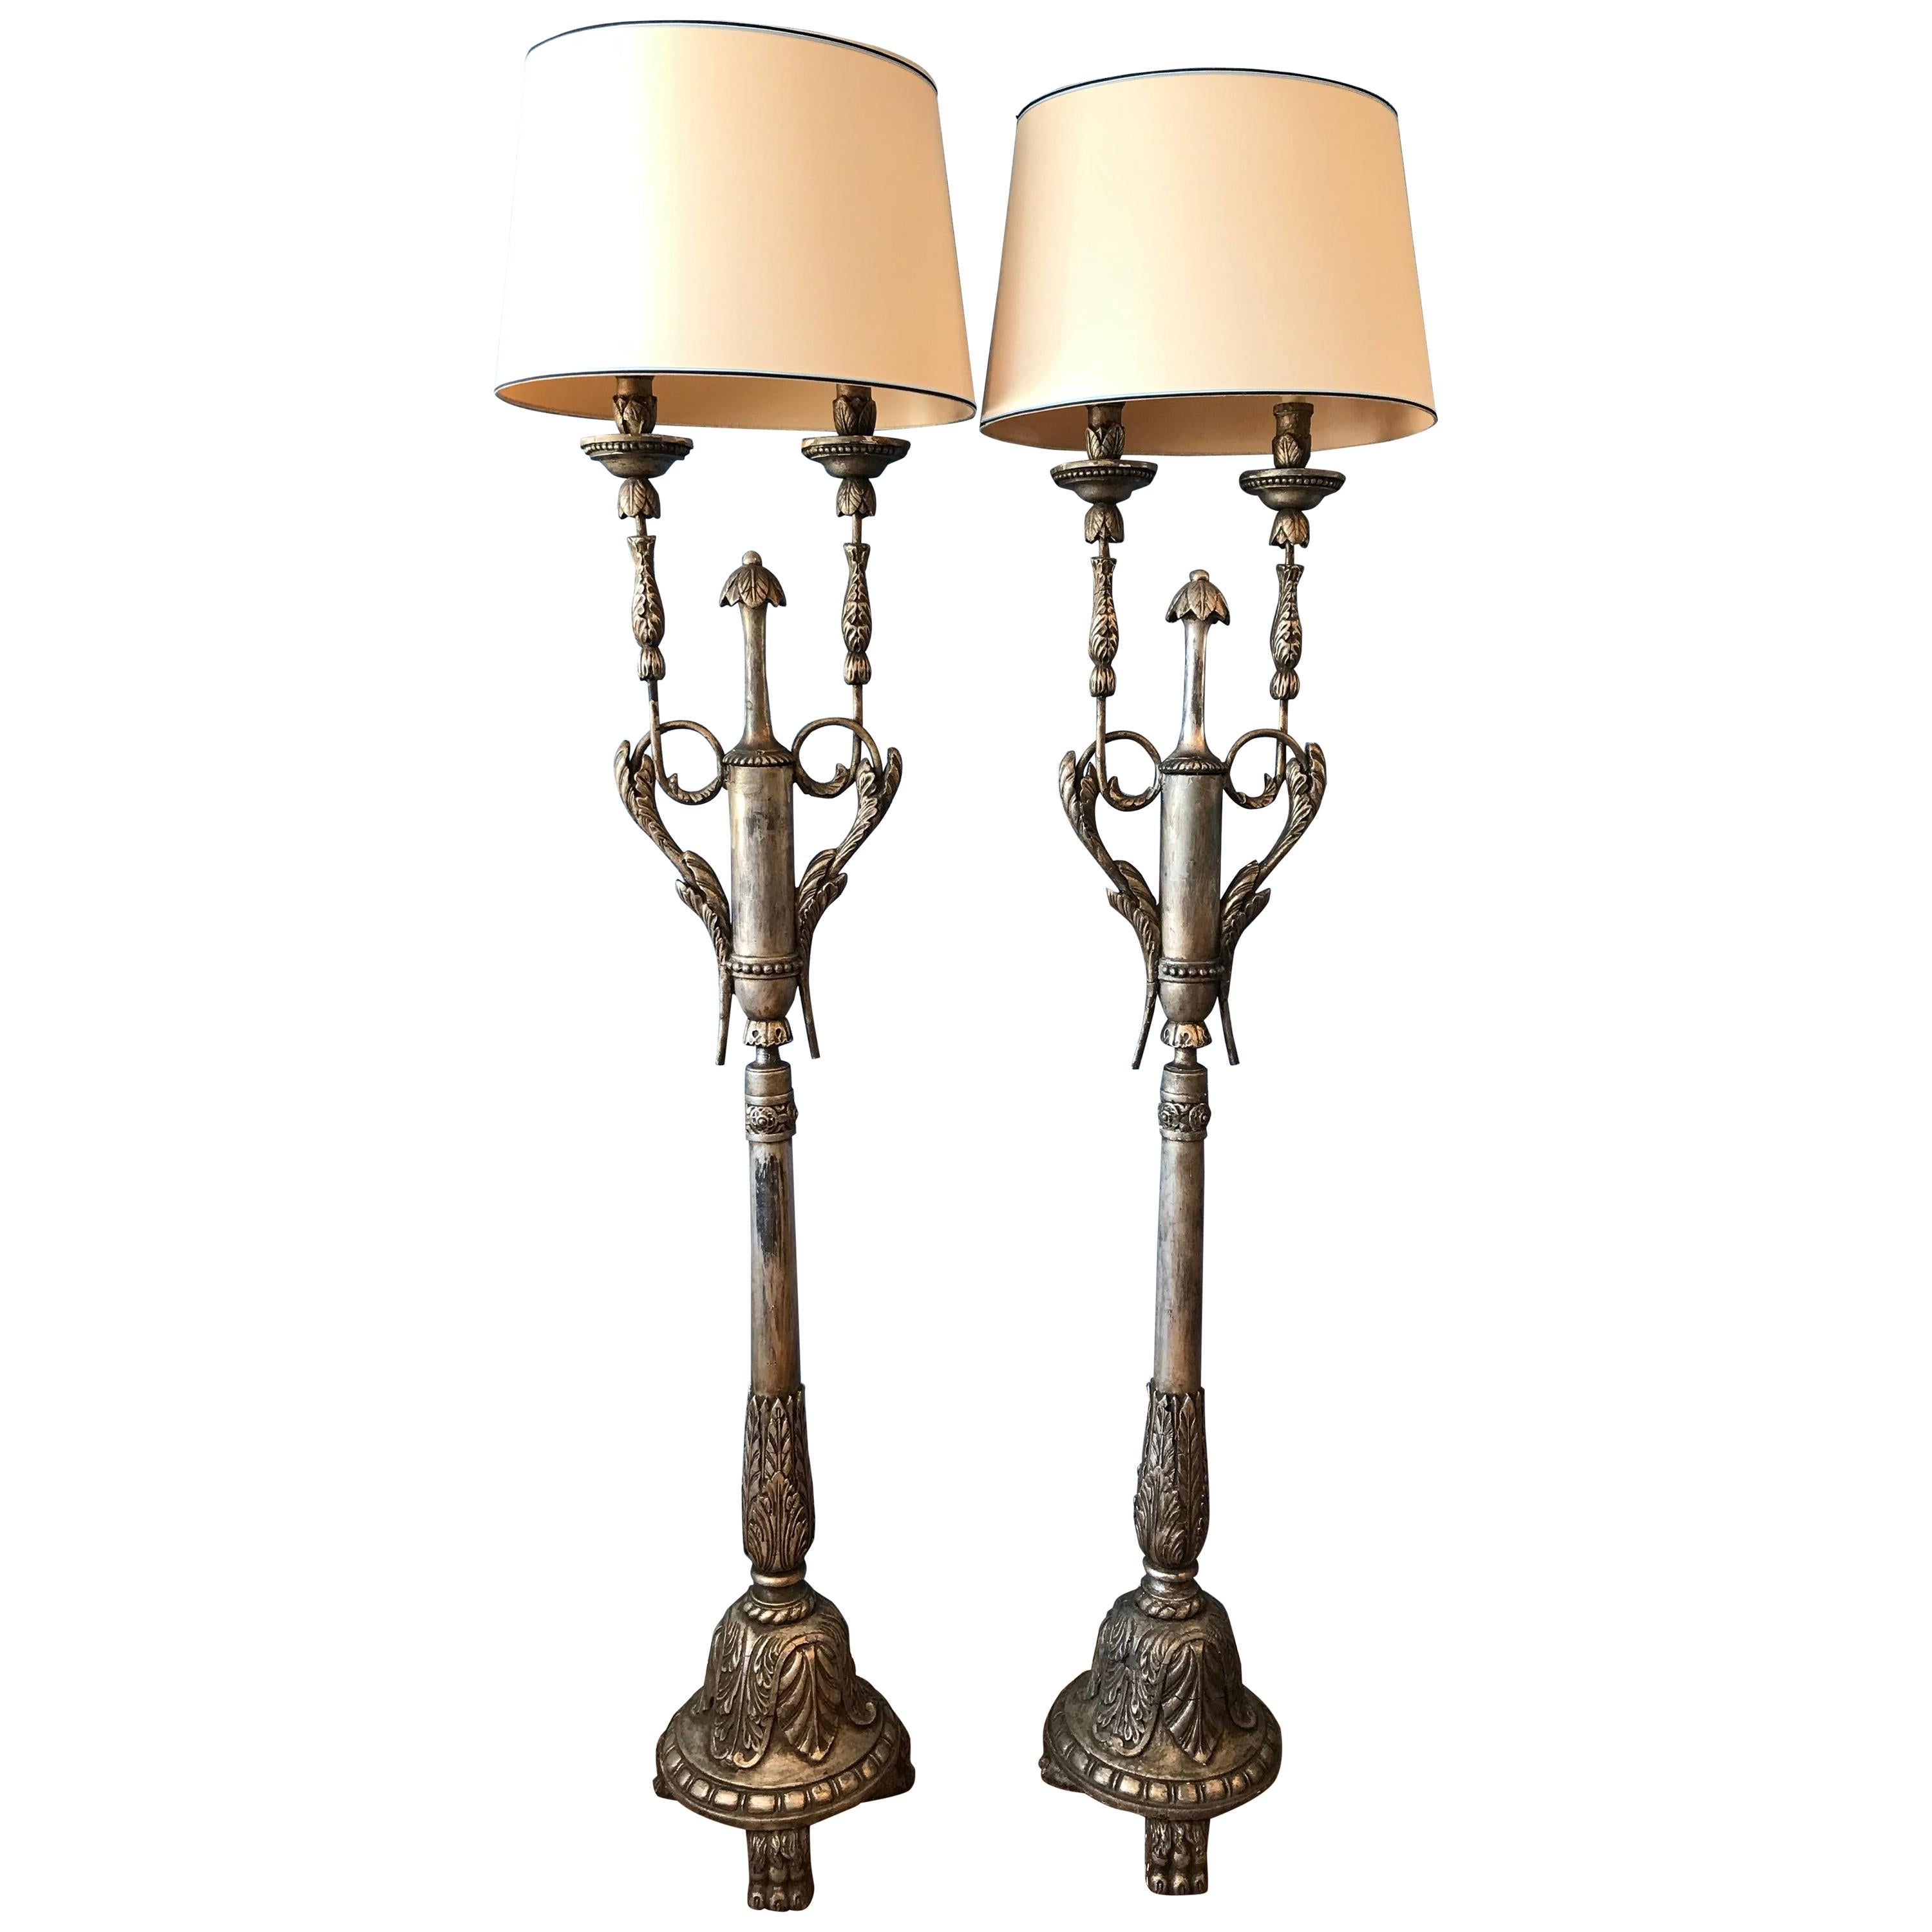 Pair of Silver-Leaf Carved Wood Torchieres / Floor Lamps For Sale